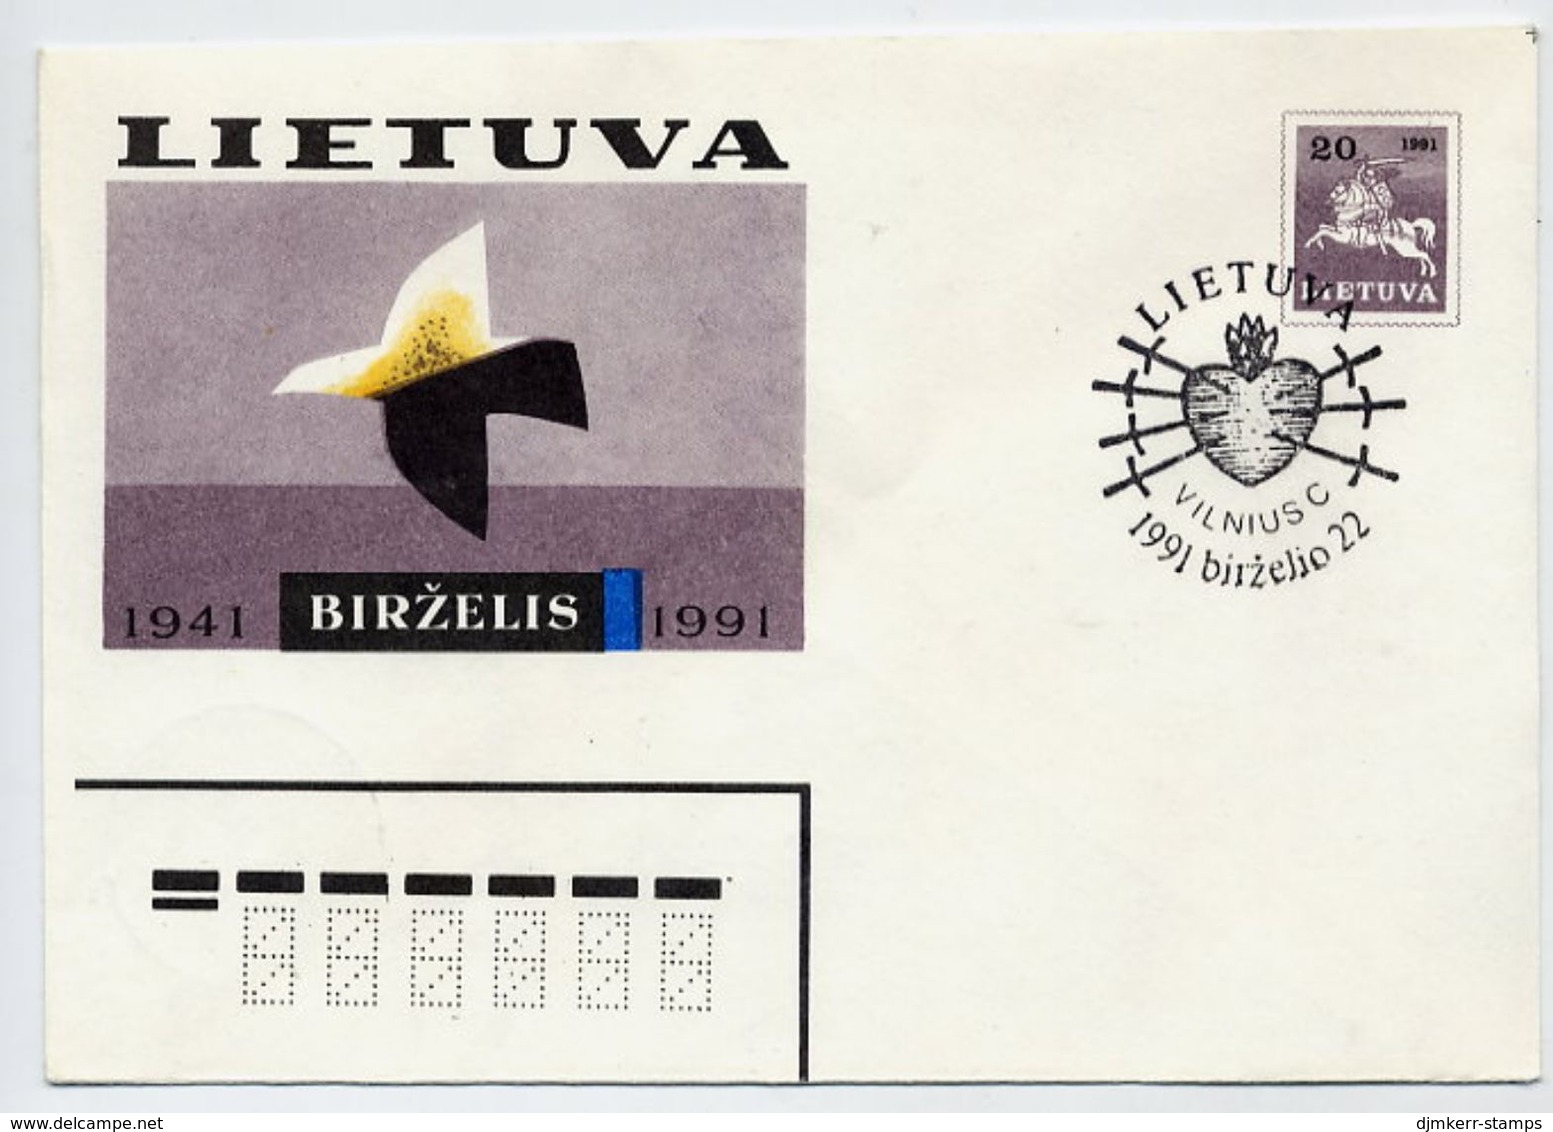 LITHUANIA 1991  Anniversary Of Rising Against The Soviet Union Stationery Envelope, Cancelled.  Michel U11 - Lituania